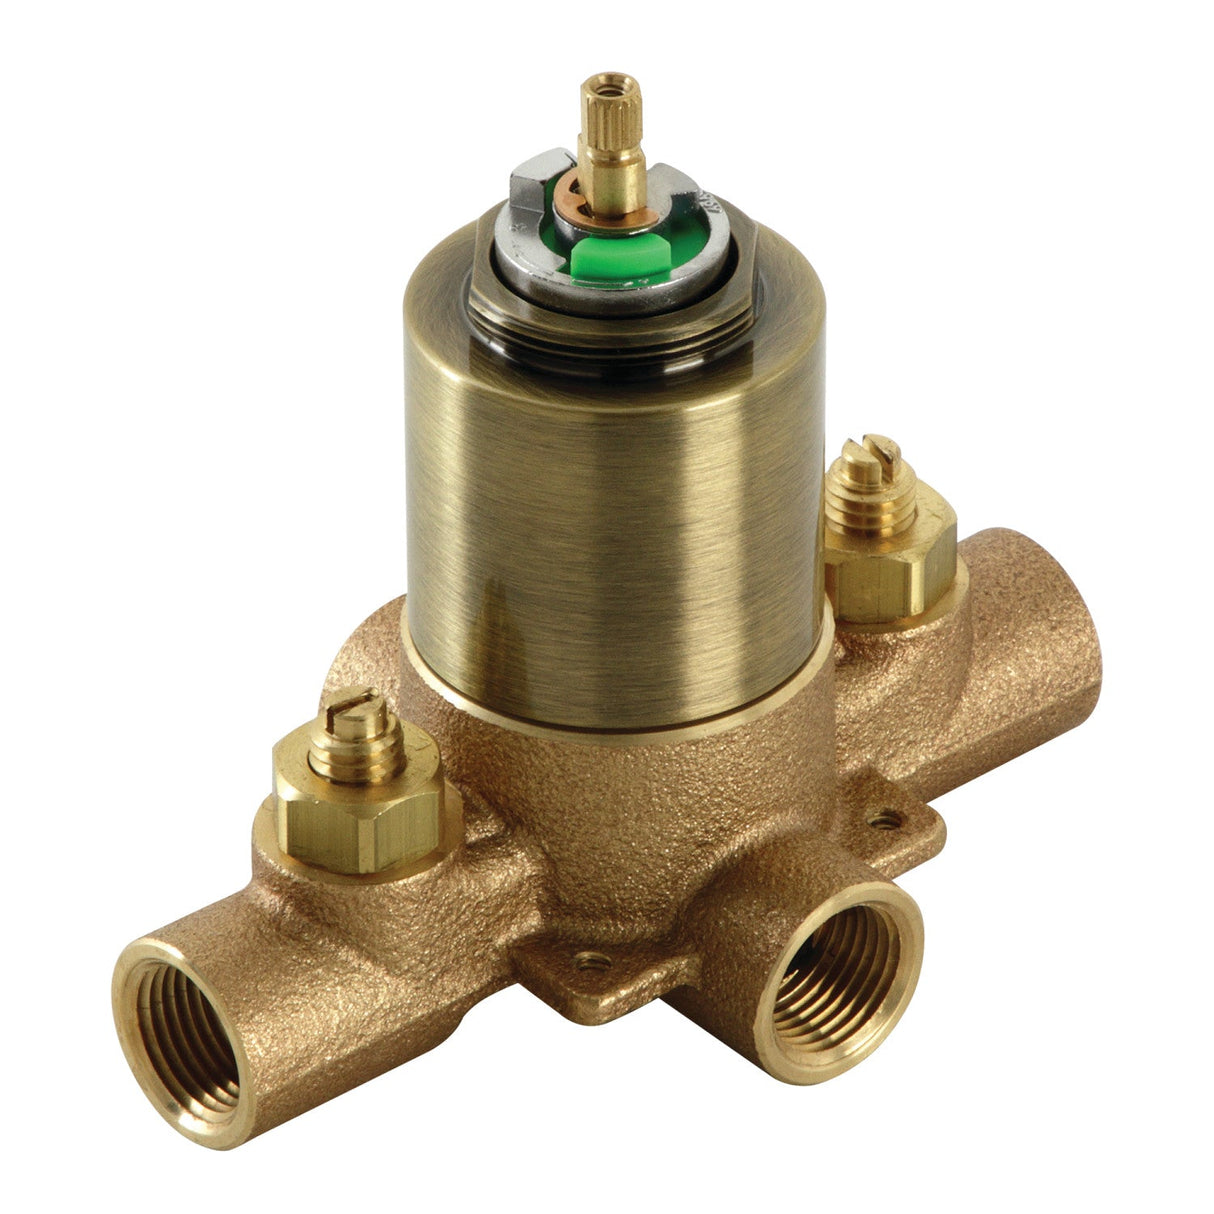 Chatham KB653V Pressure Balanced Tub and Shower Valve, with Stops, Antique Brass